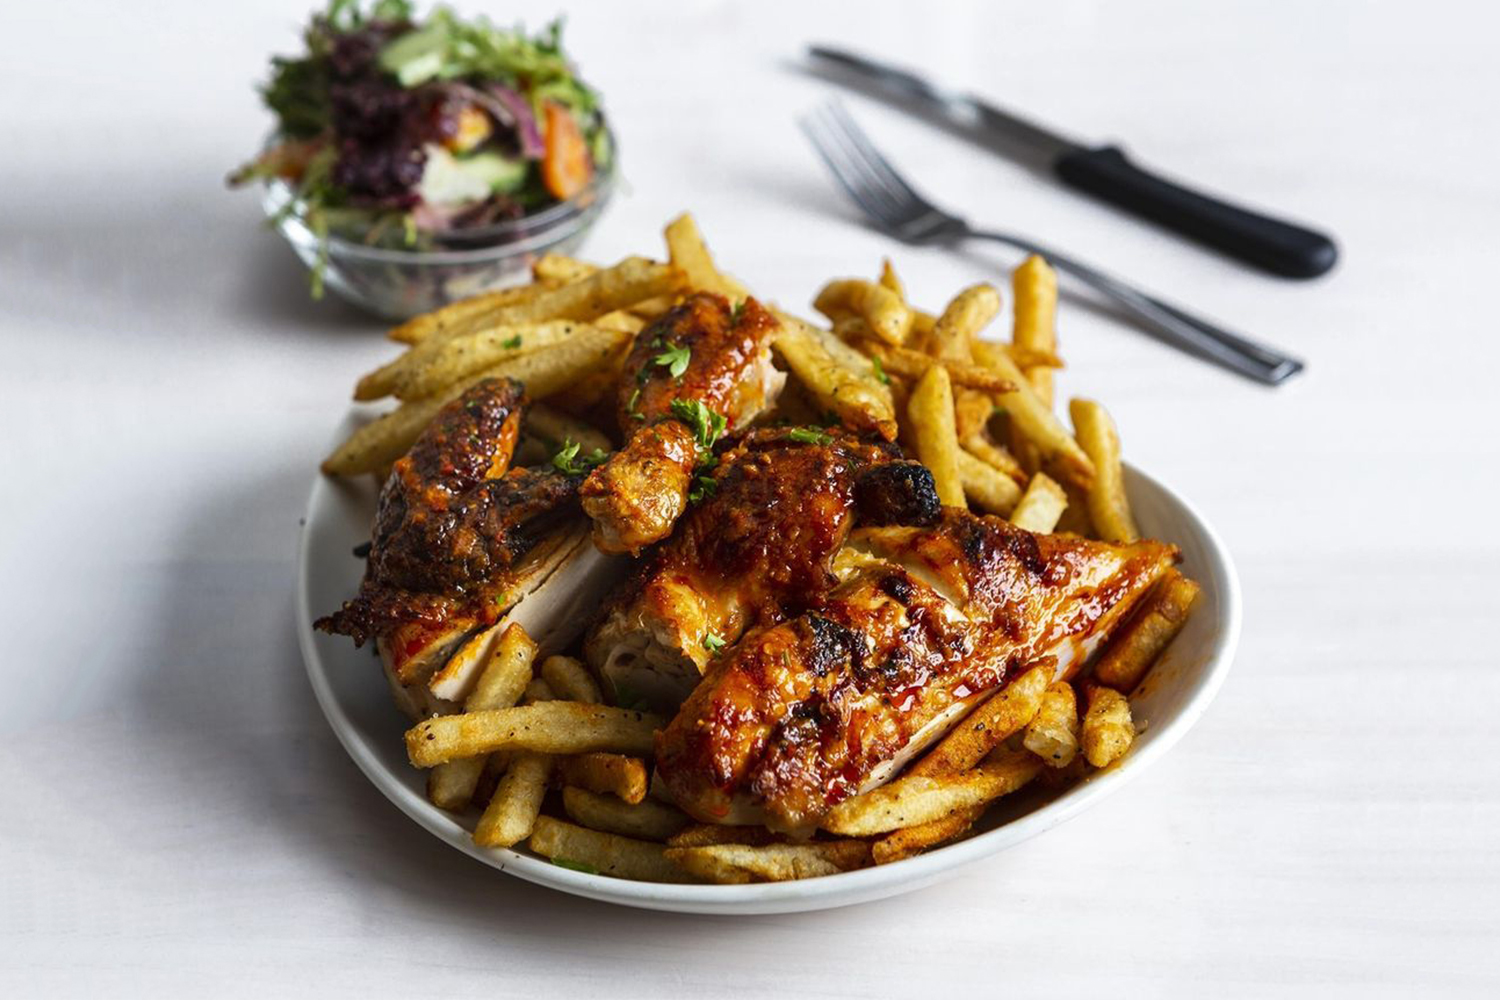 The Piri Piri chicken at Cantine Emilia at Le Central food hall in Montreal, Quebec